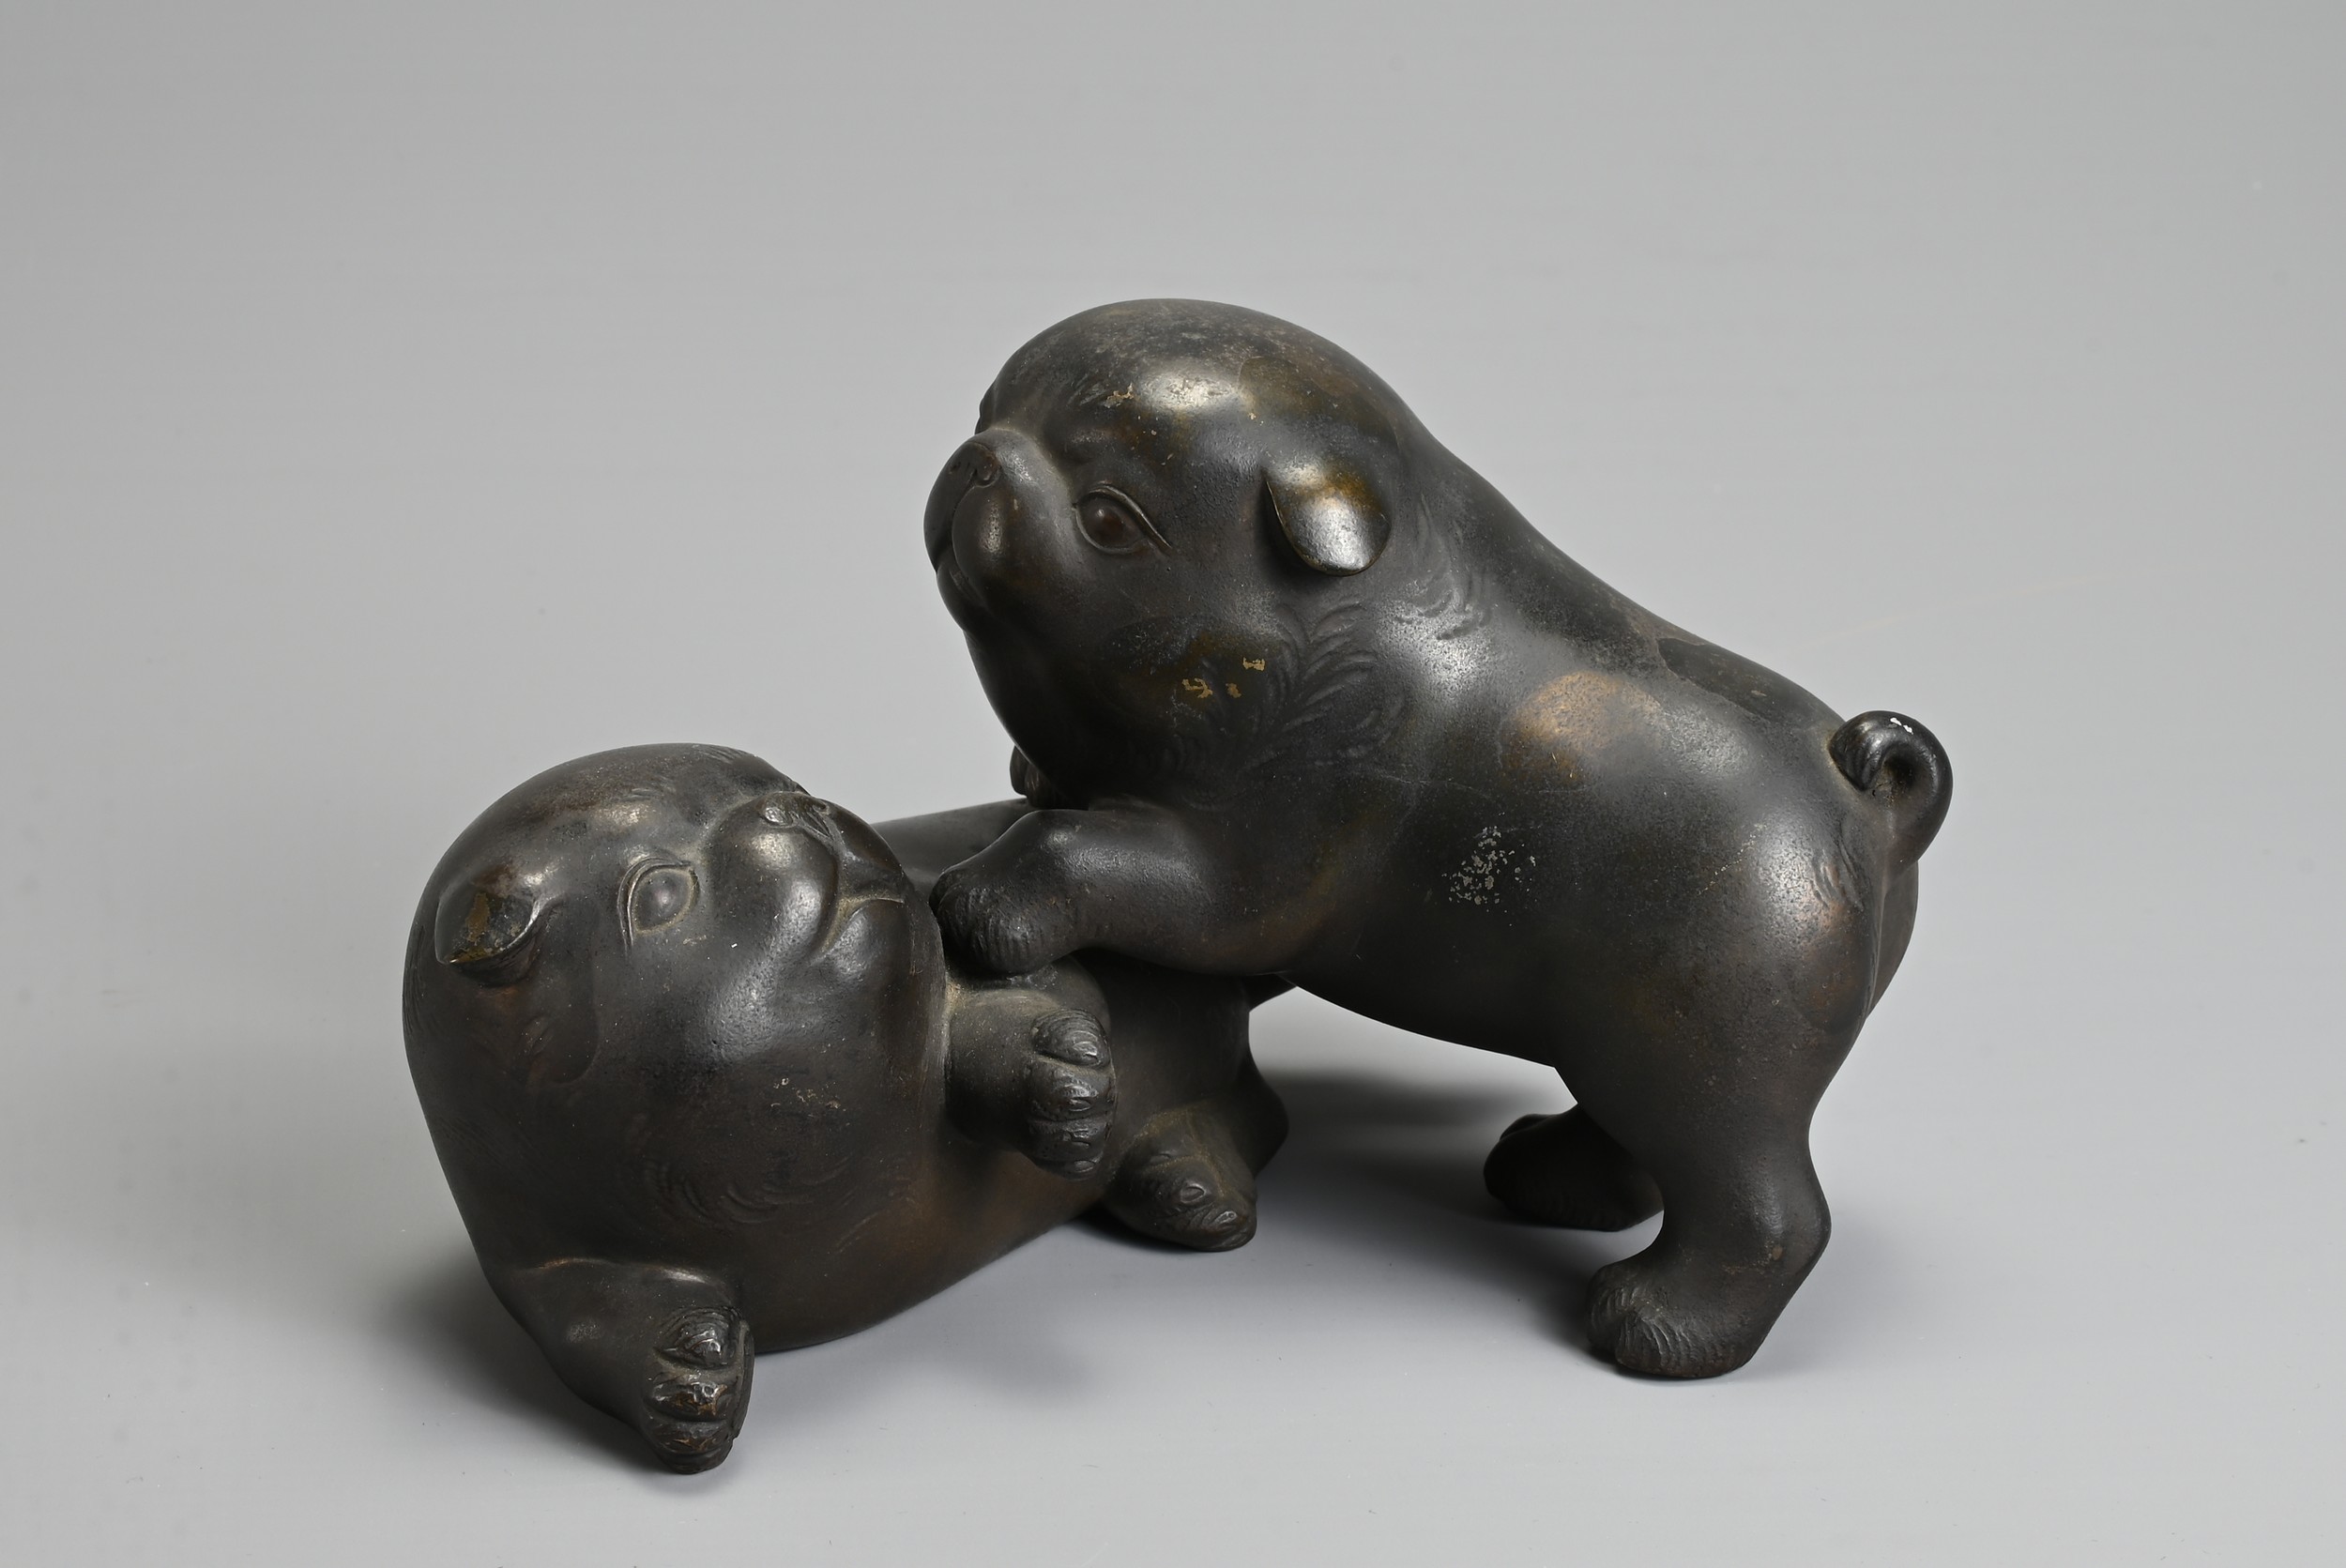 AN EARLY 20TH CENTURY JAPANESE BRONZE OF TWO PUPPIES PLAYING. Signed Tokutani with seal mark to - Image 5 of 7